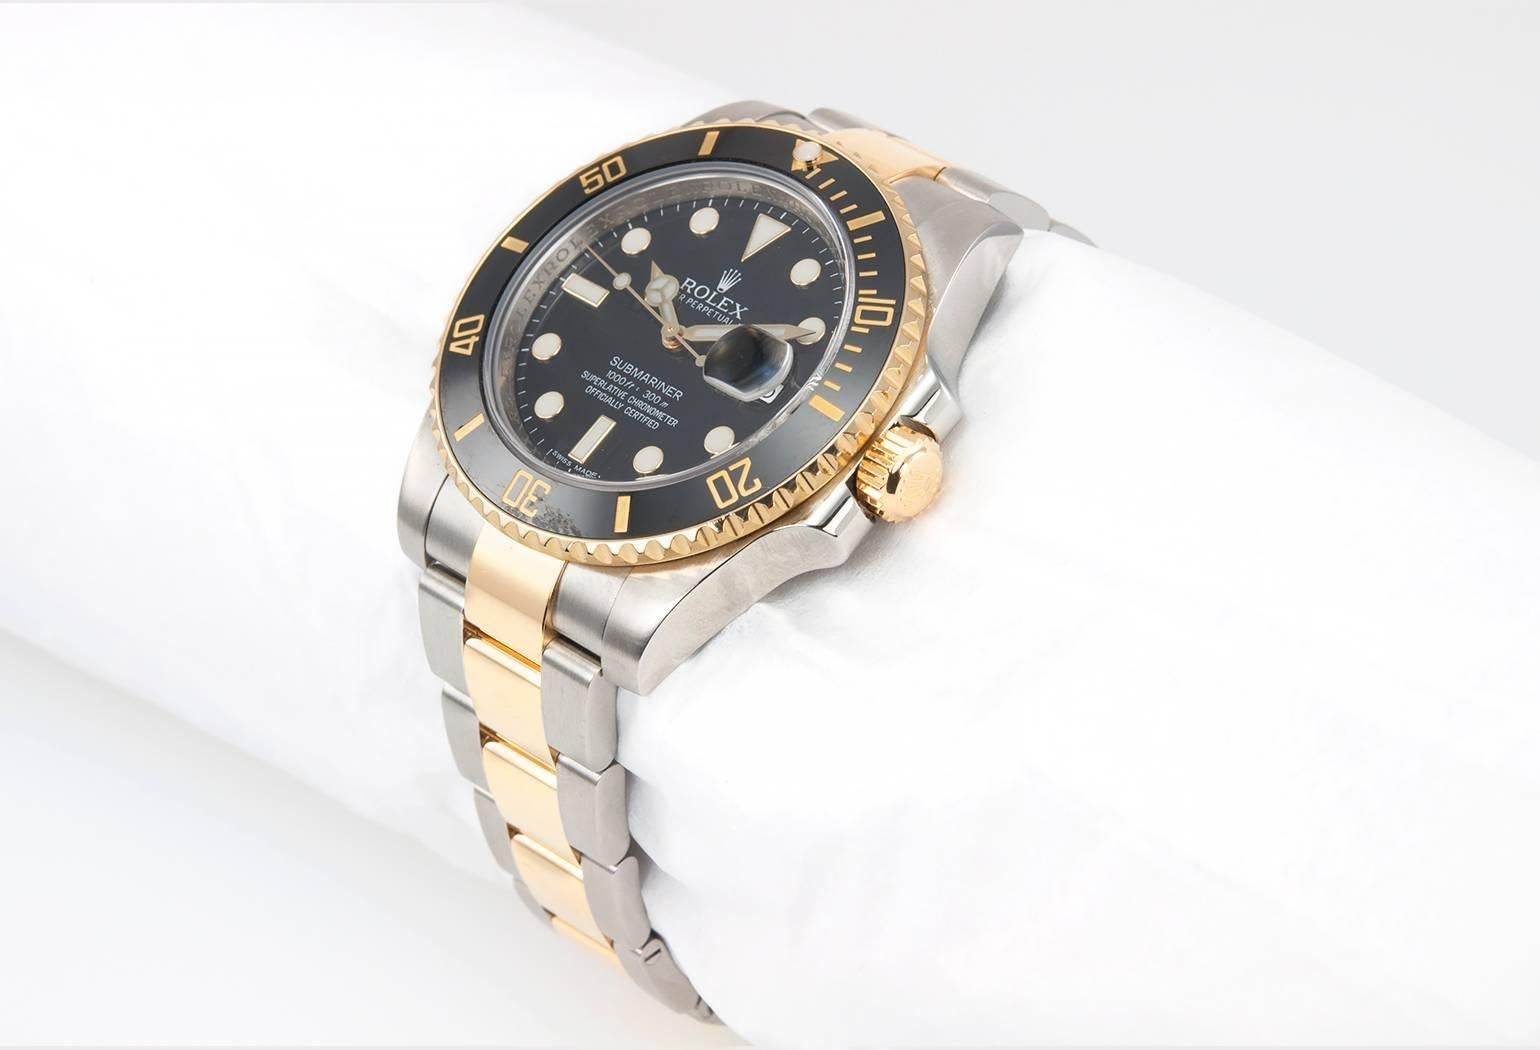 Rolex Submariner in stainless steel and 18K yellow gold, reference 116613.  This classic Rolex watch features a black ceramic bezel, a black dial, sapphire crystal, 18K yellow gold waterproof crown, with an 18K yellow gold  and stainless steel